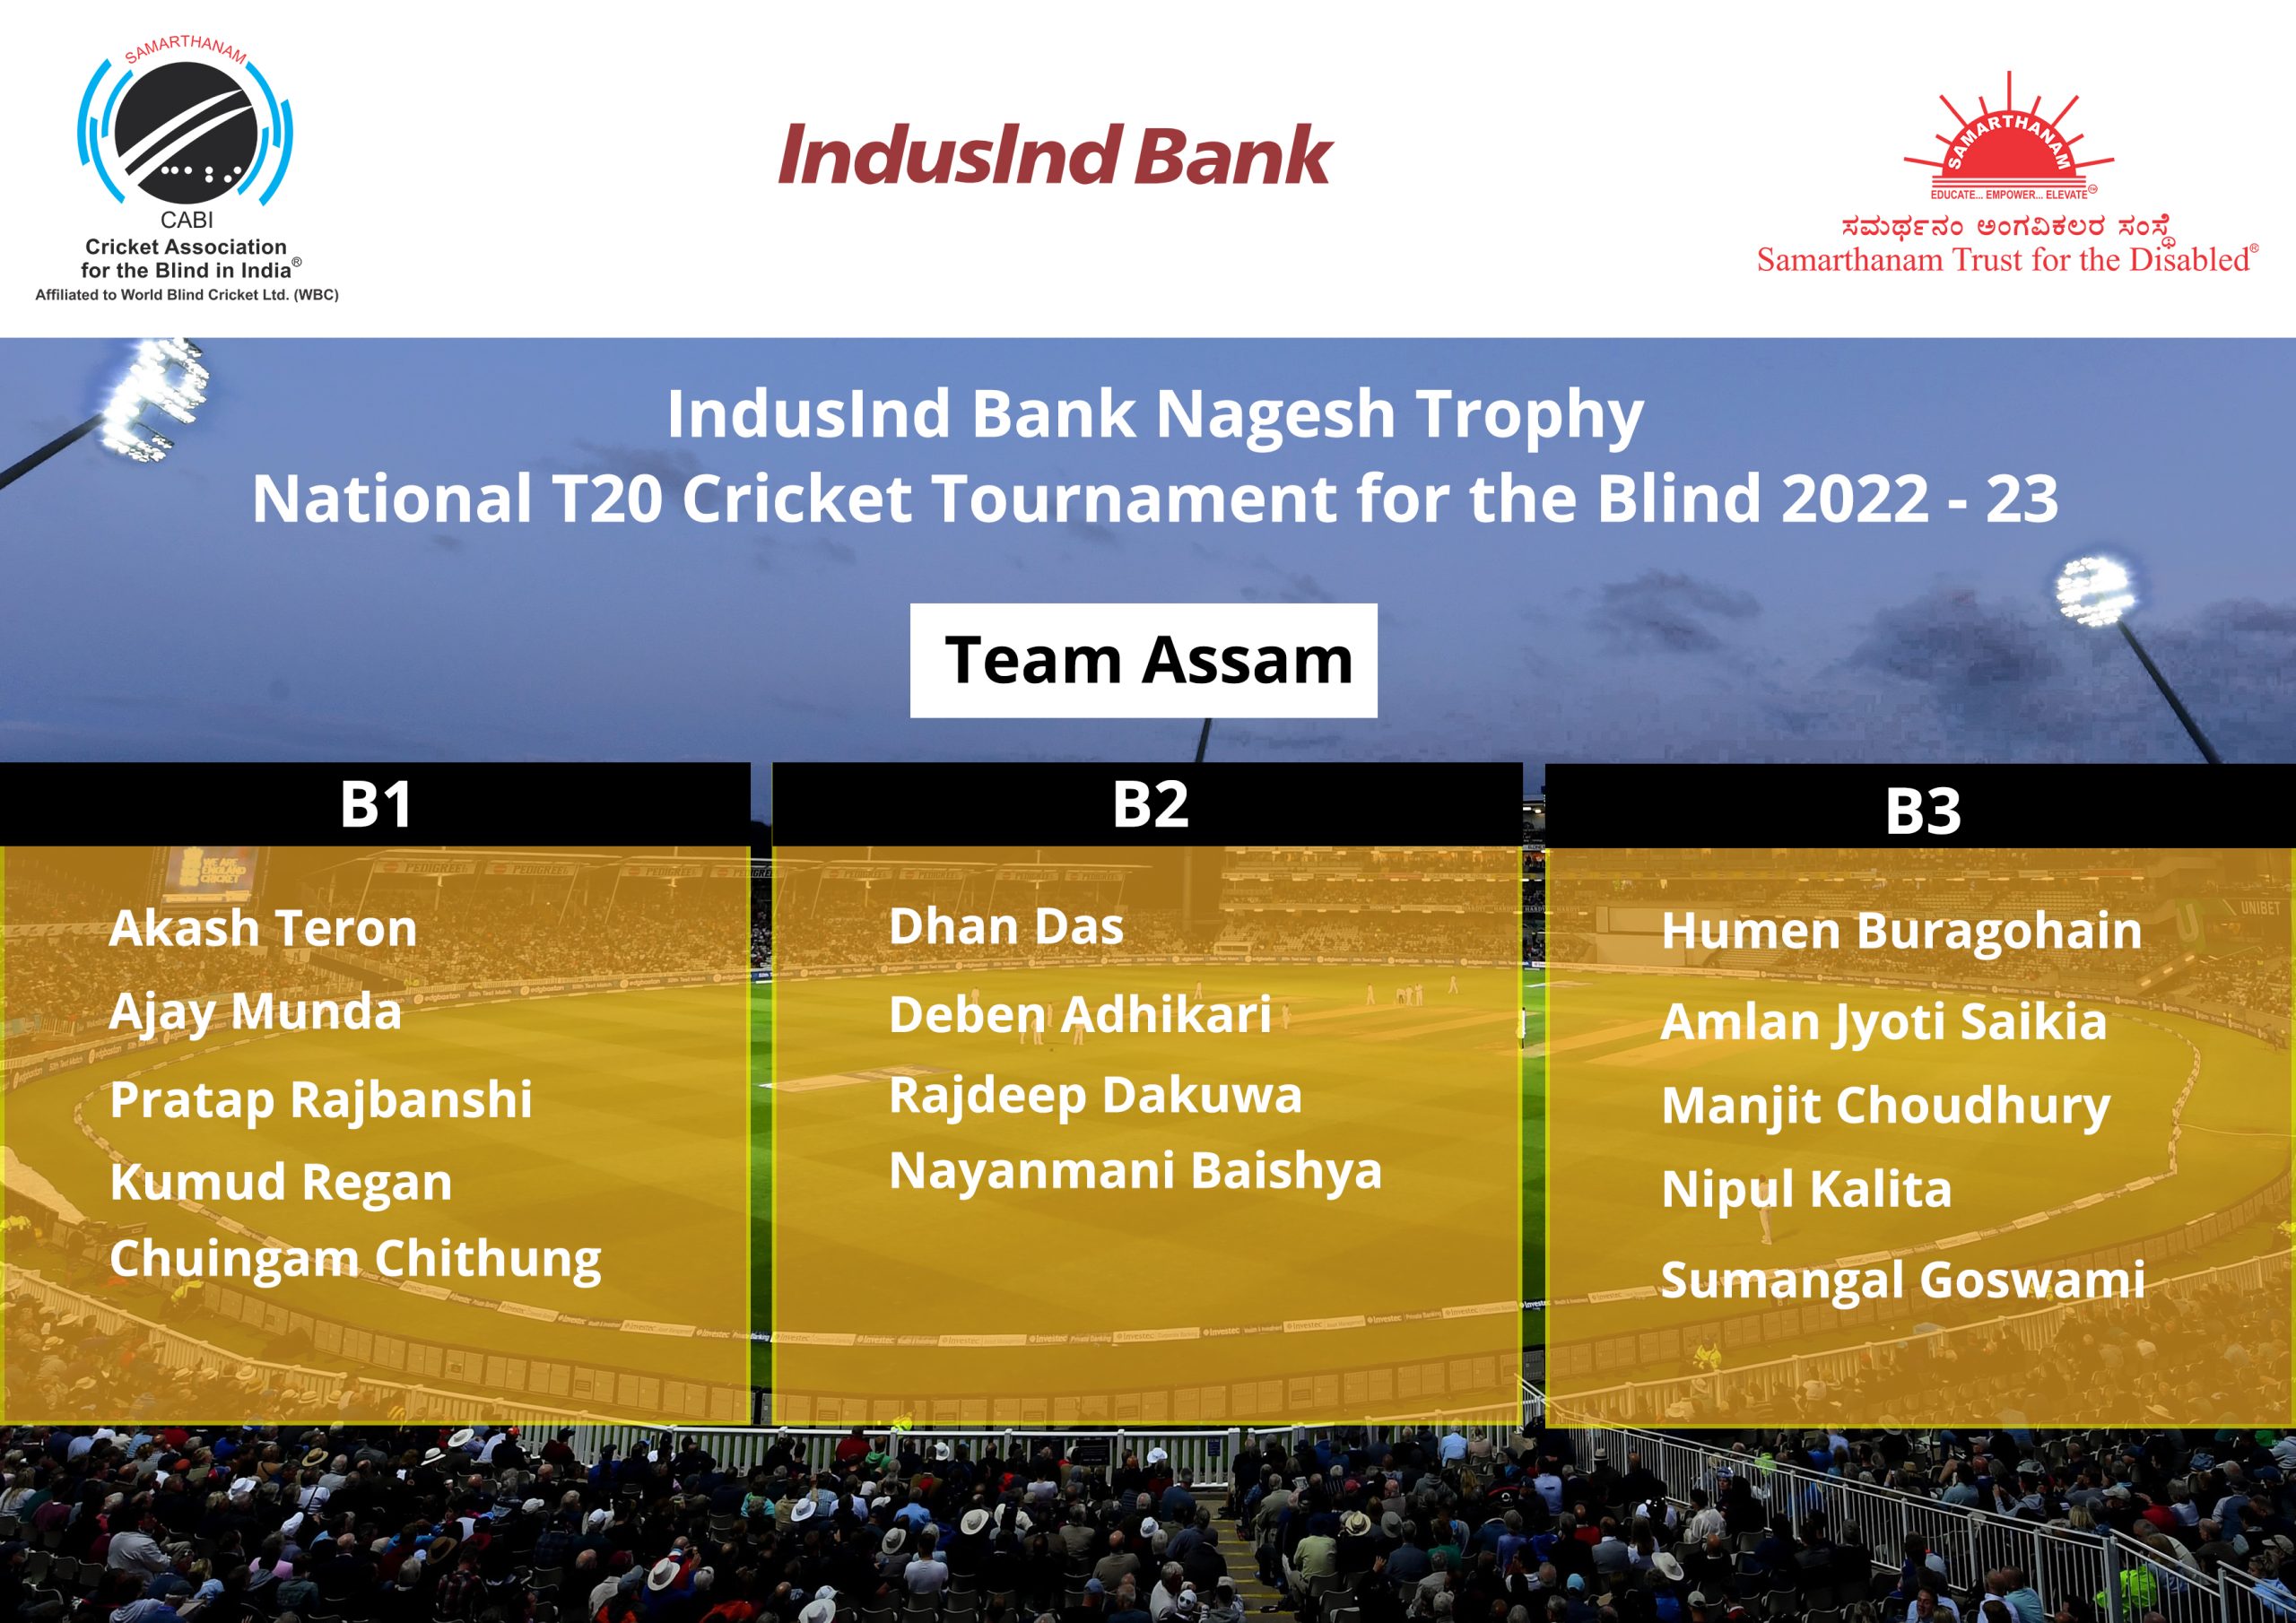 Group F players of IndusInd Bank Nagesh Trophy National T20 Cricket Tournament for the Blind 2022 – 2023